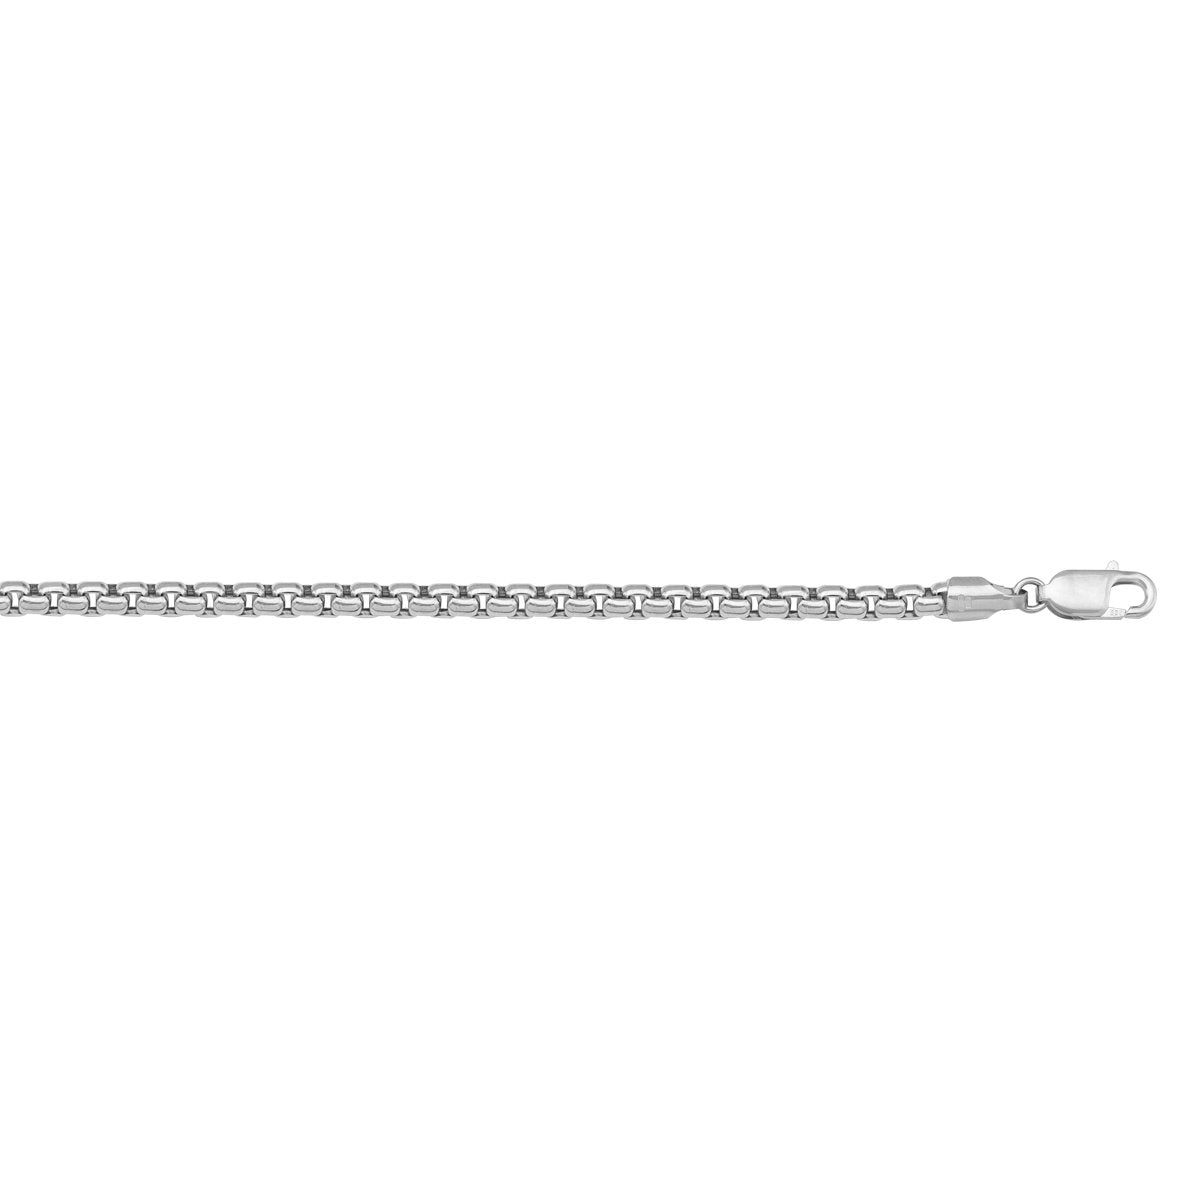 BRACELETS WHITE GOLD HOLLOW BOX LINK  (LOBSTER CLASP) CHAIN